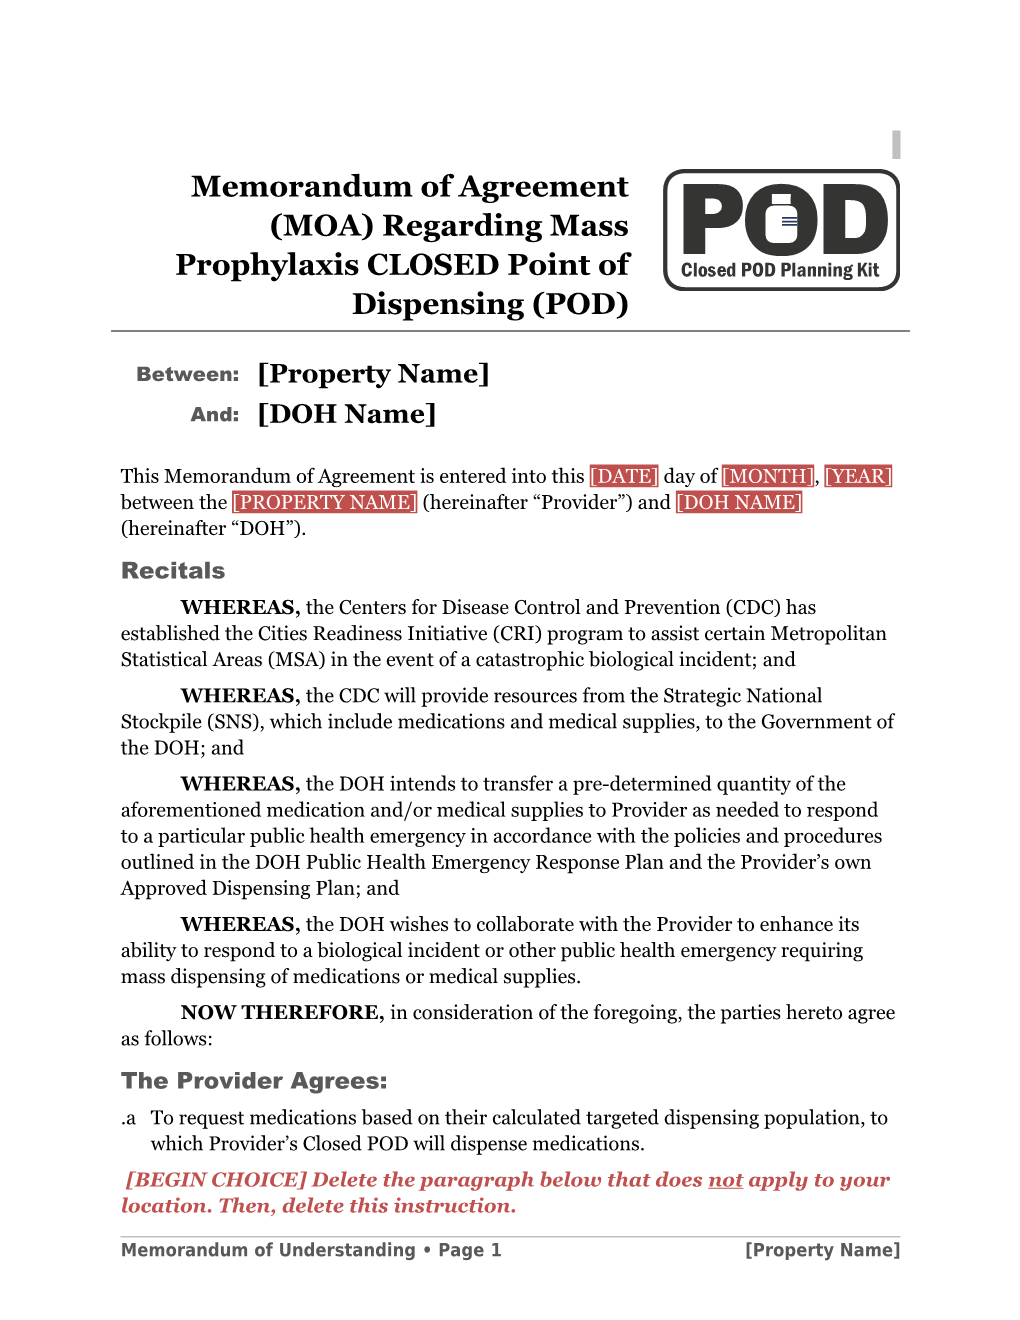 This Memorandum of Agreement Is Entered Into This DATE Day of MONTH , YEAR Between The